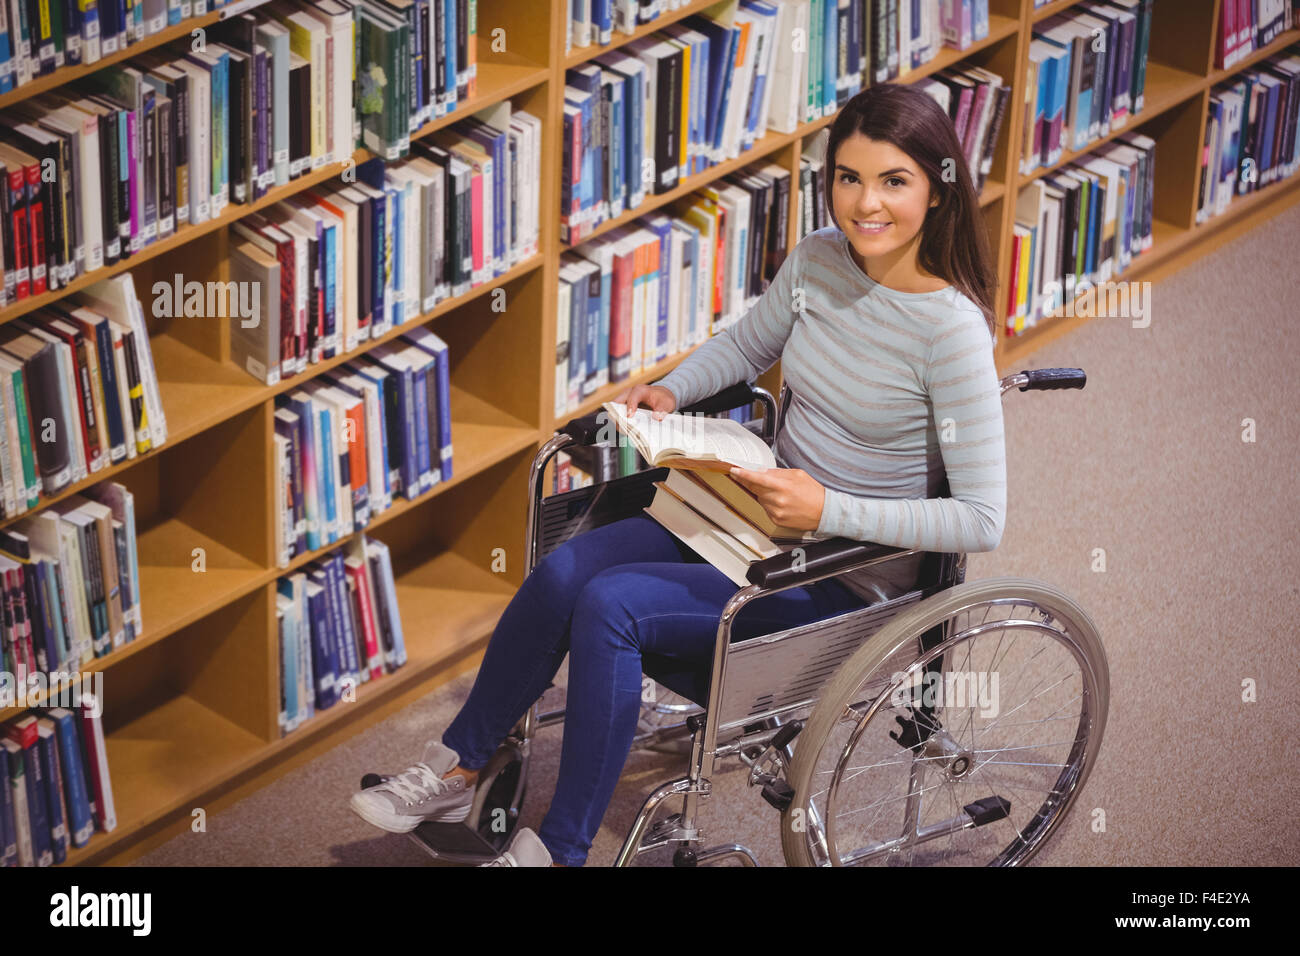 Disabled female student smiling while reading book Stock Photo